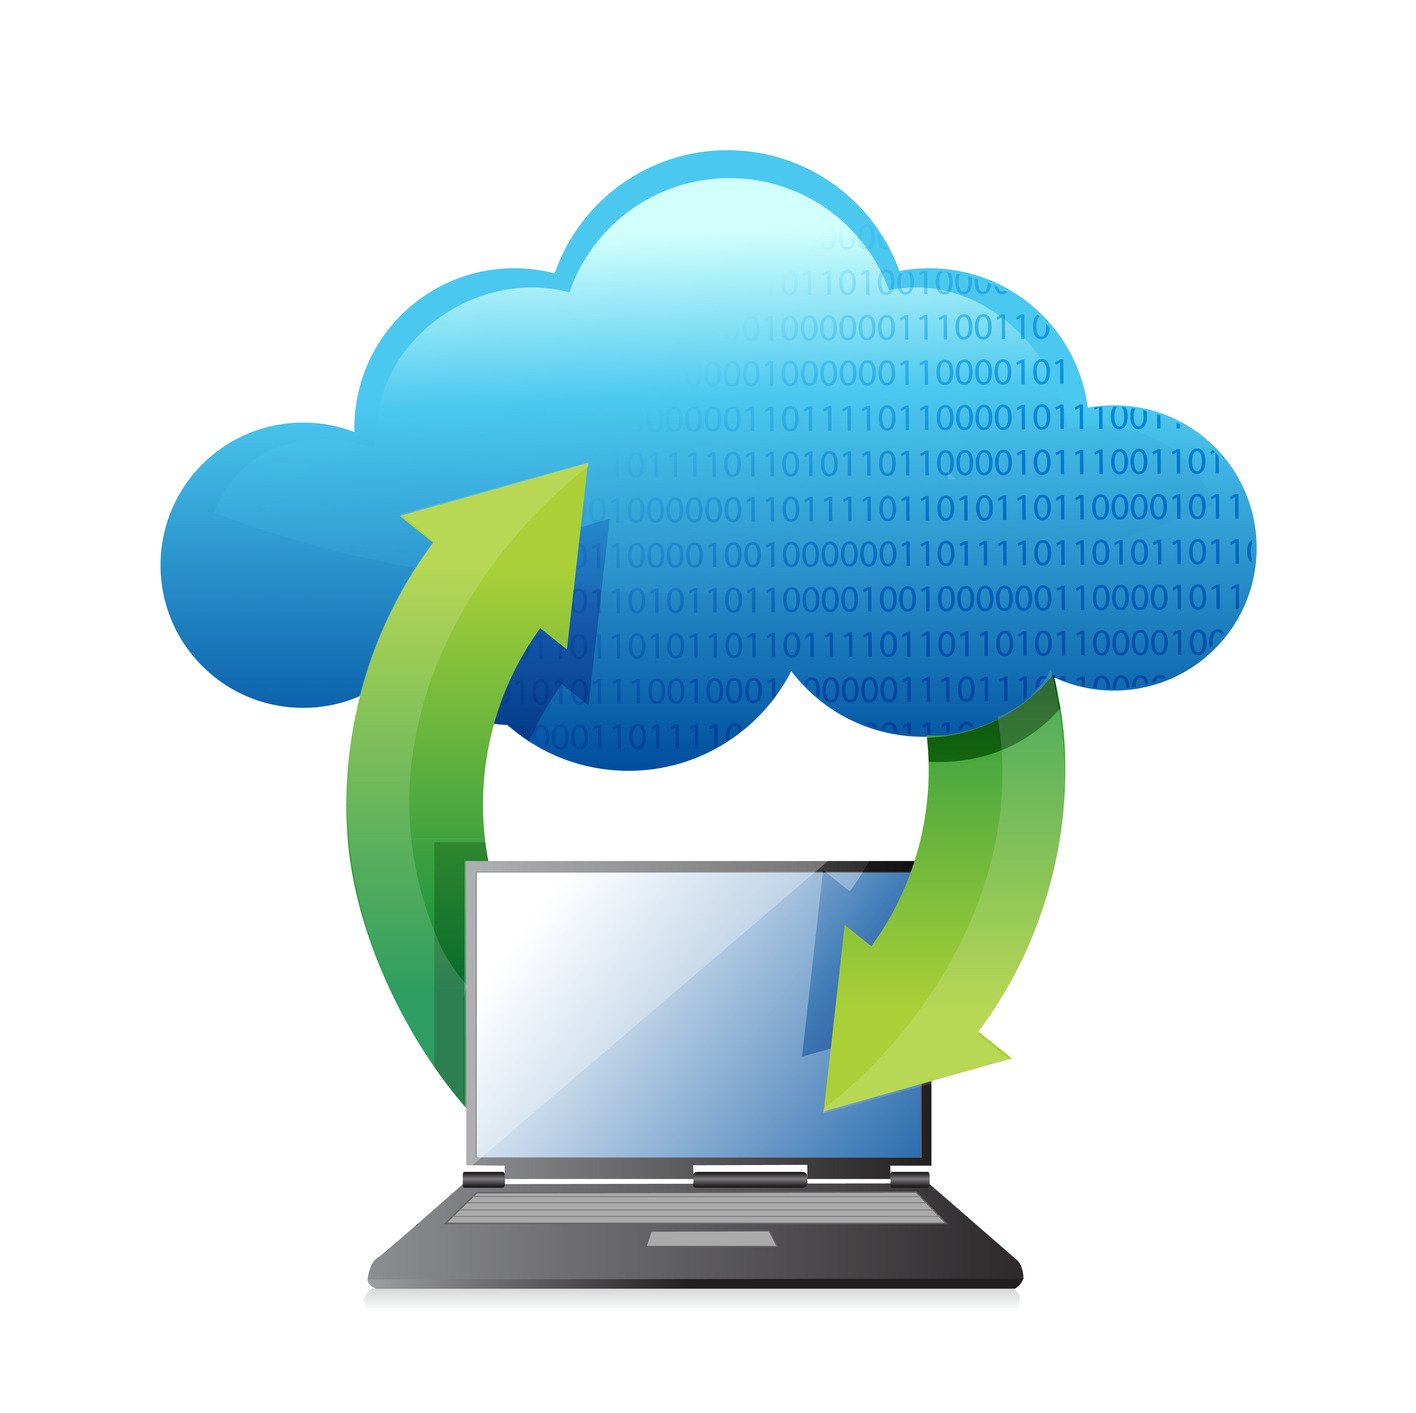 laptops transferring to cloud illustration design over a white background